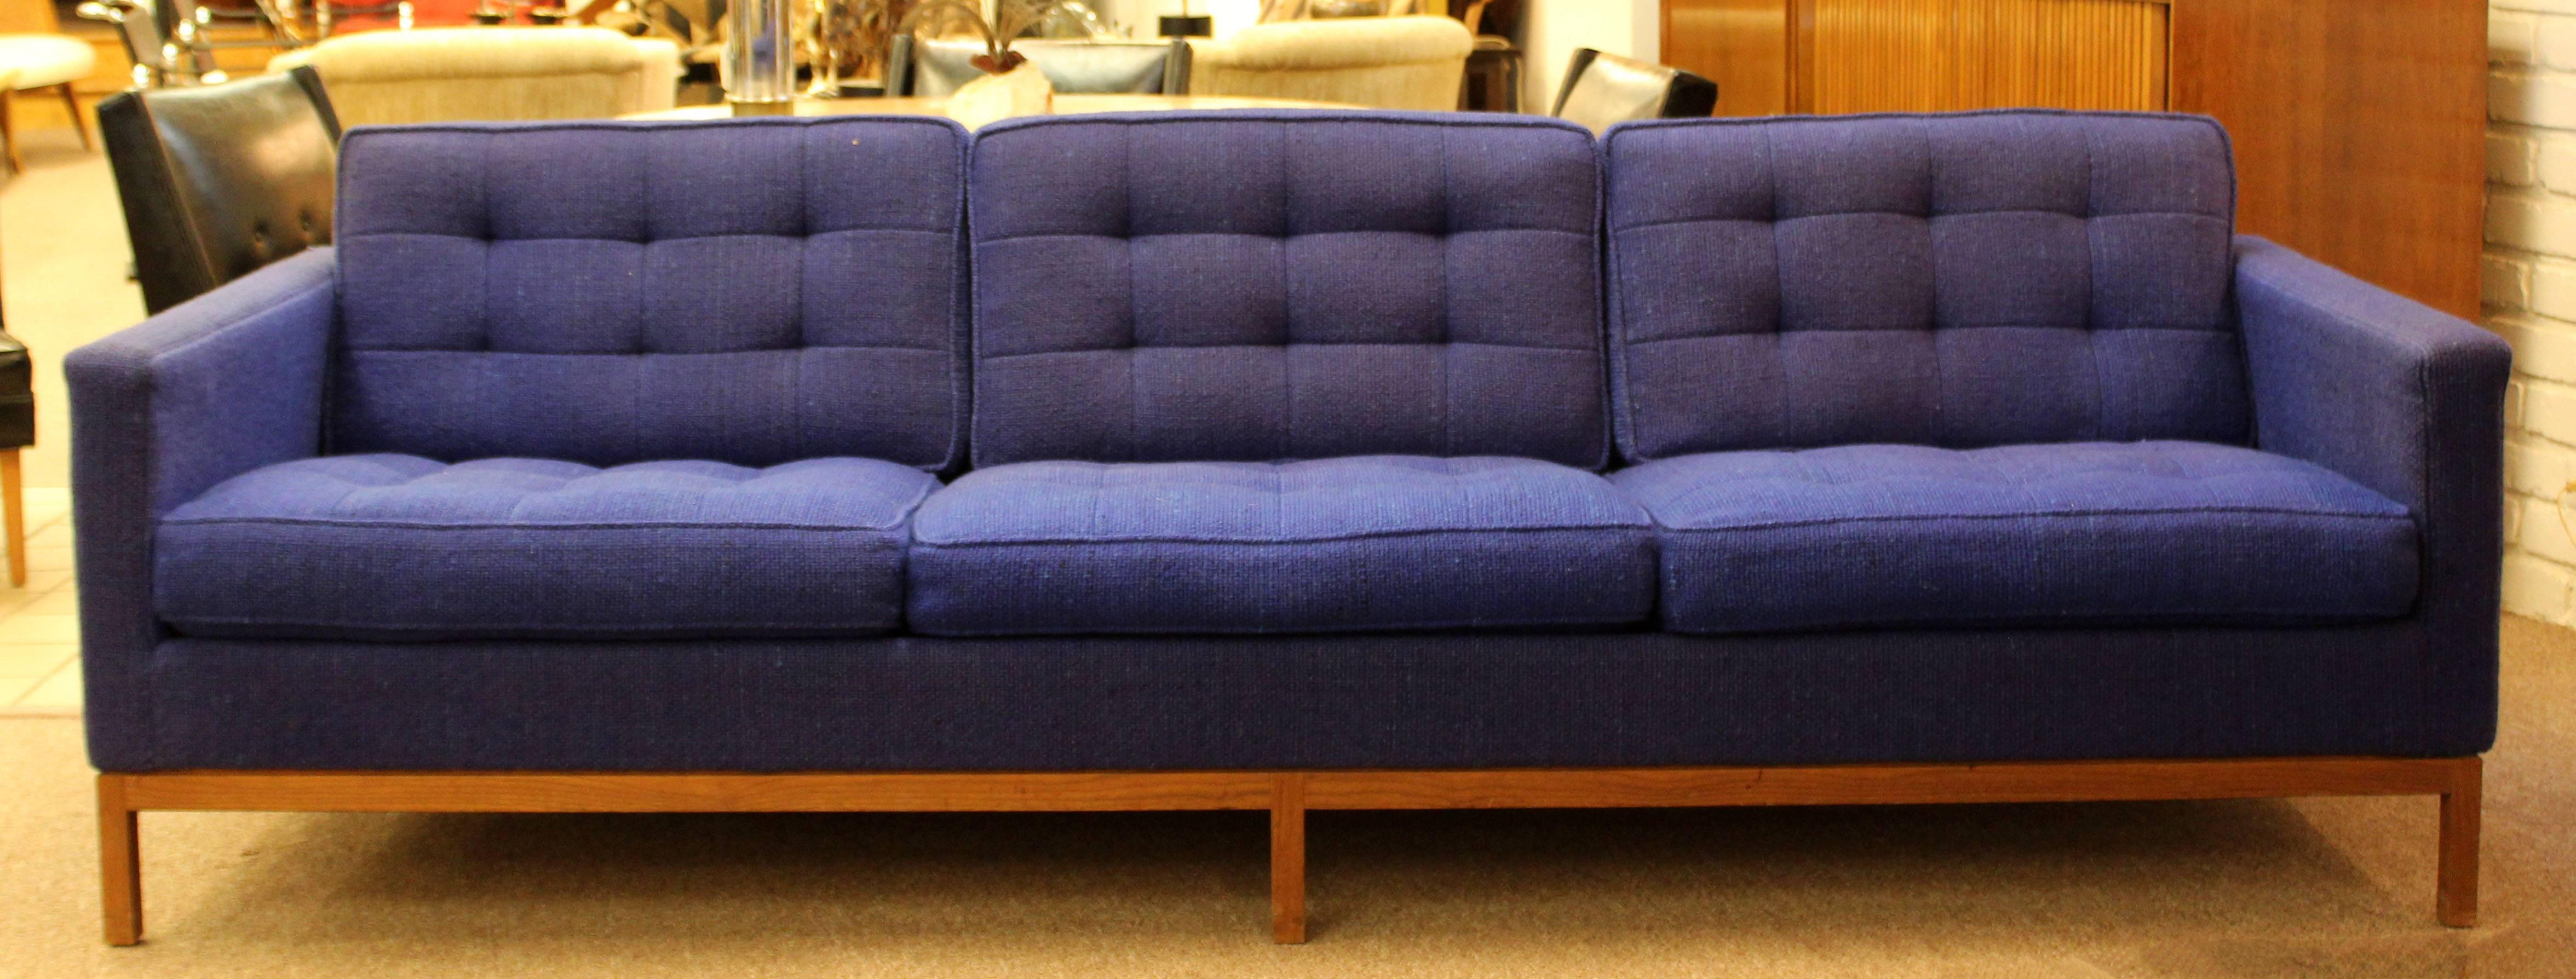 For your consideration is a fabulous and rare blue tufted, three seat sofa by Knoll, circa the 1950s. Original Knoll blue wool blend fabric. Fabric, frame and foam is in excellent condition except for outside of the arms has very slight fading. The